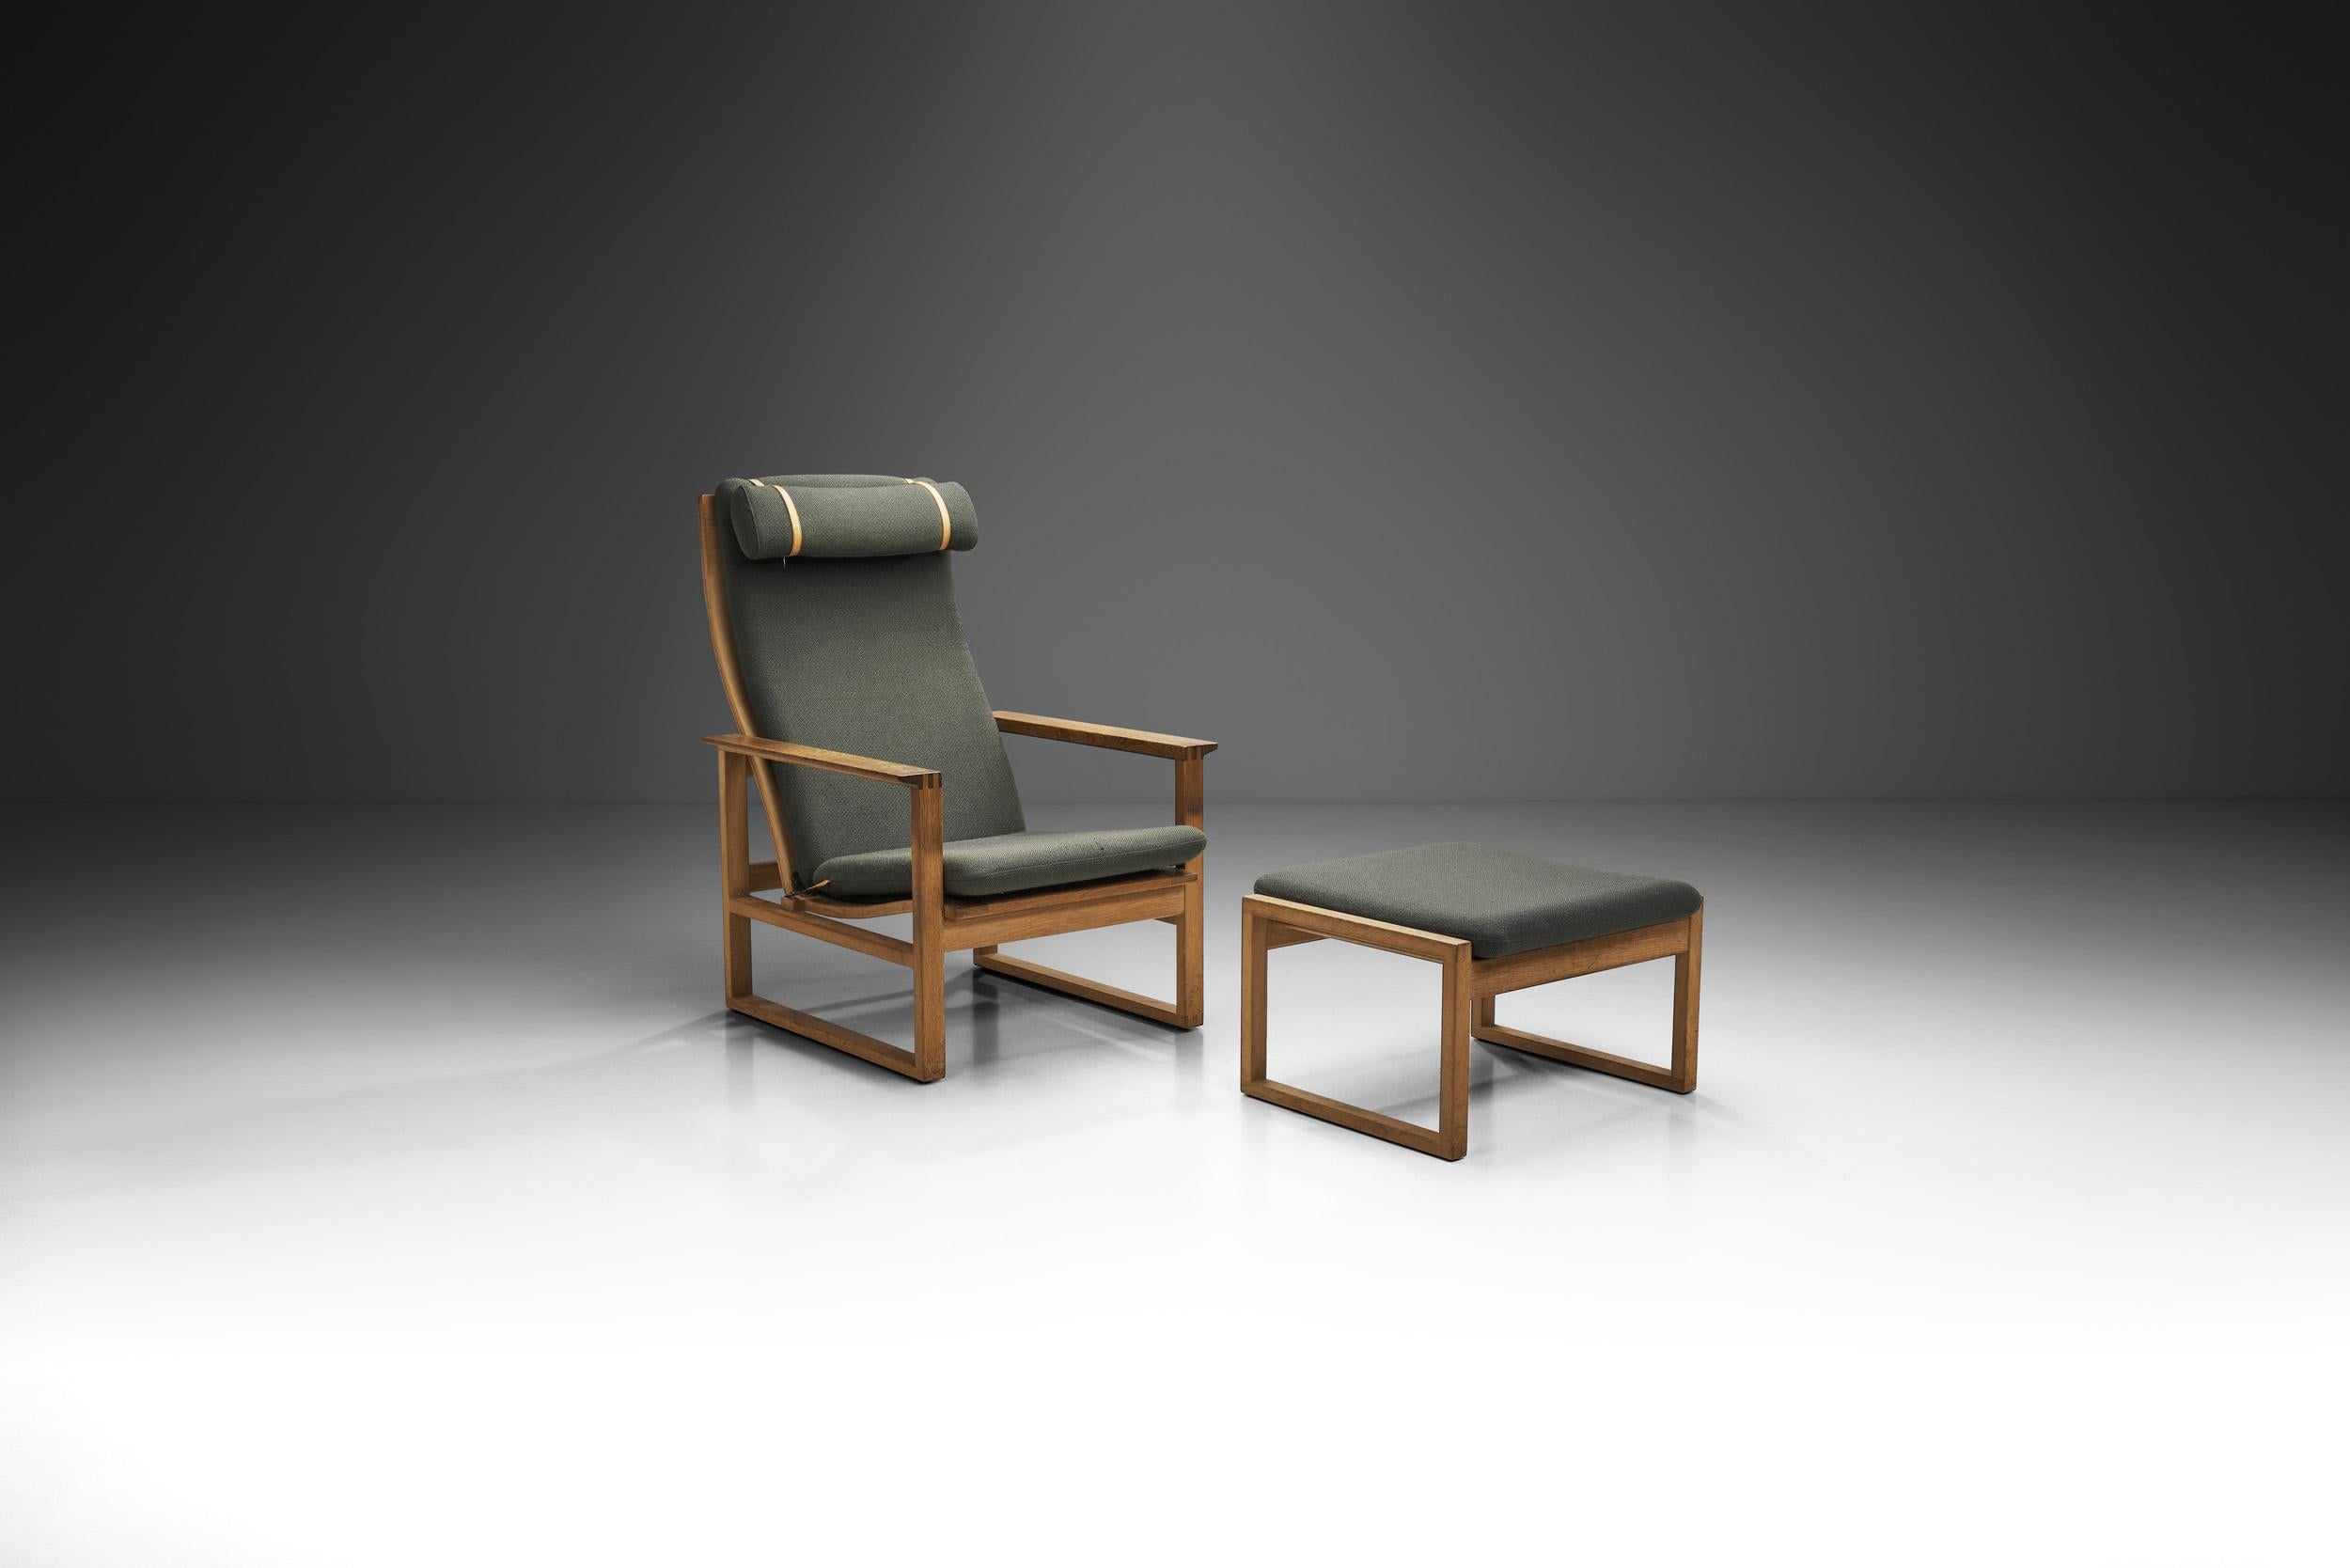 The designs of Borge Mogensen aimed at functionality, minimalist appearance and easy accessibility. This lounge chair is perhaps one of the best examples of these principles of the Danish master. Both the two-position Model “2254” chair and “2248”